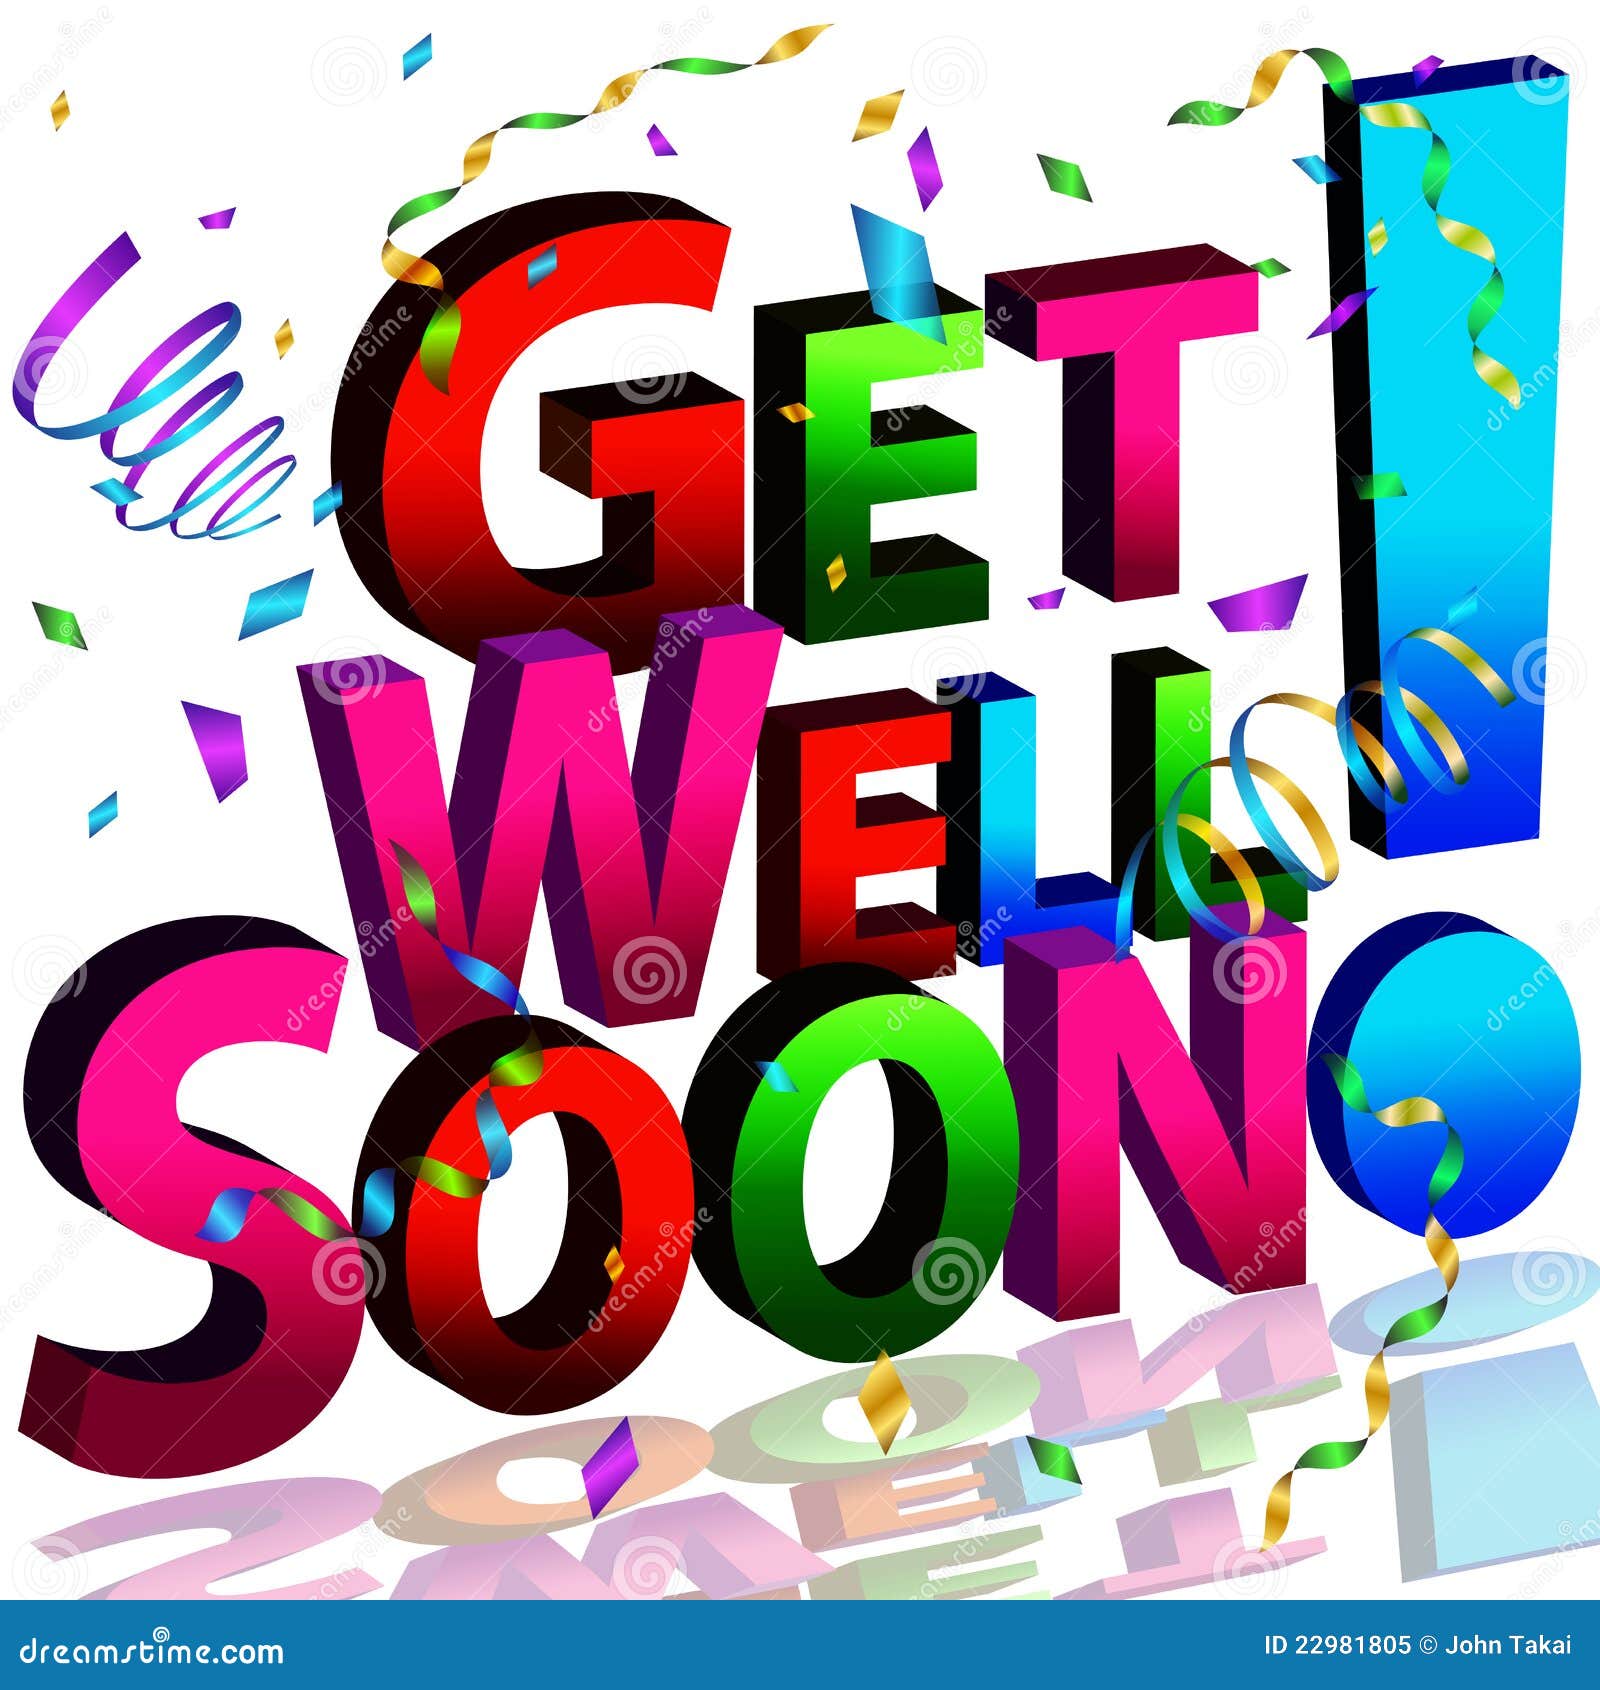 free clipart images get well soon - photo #28